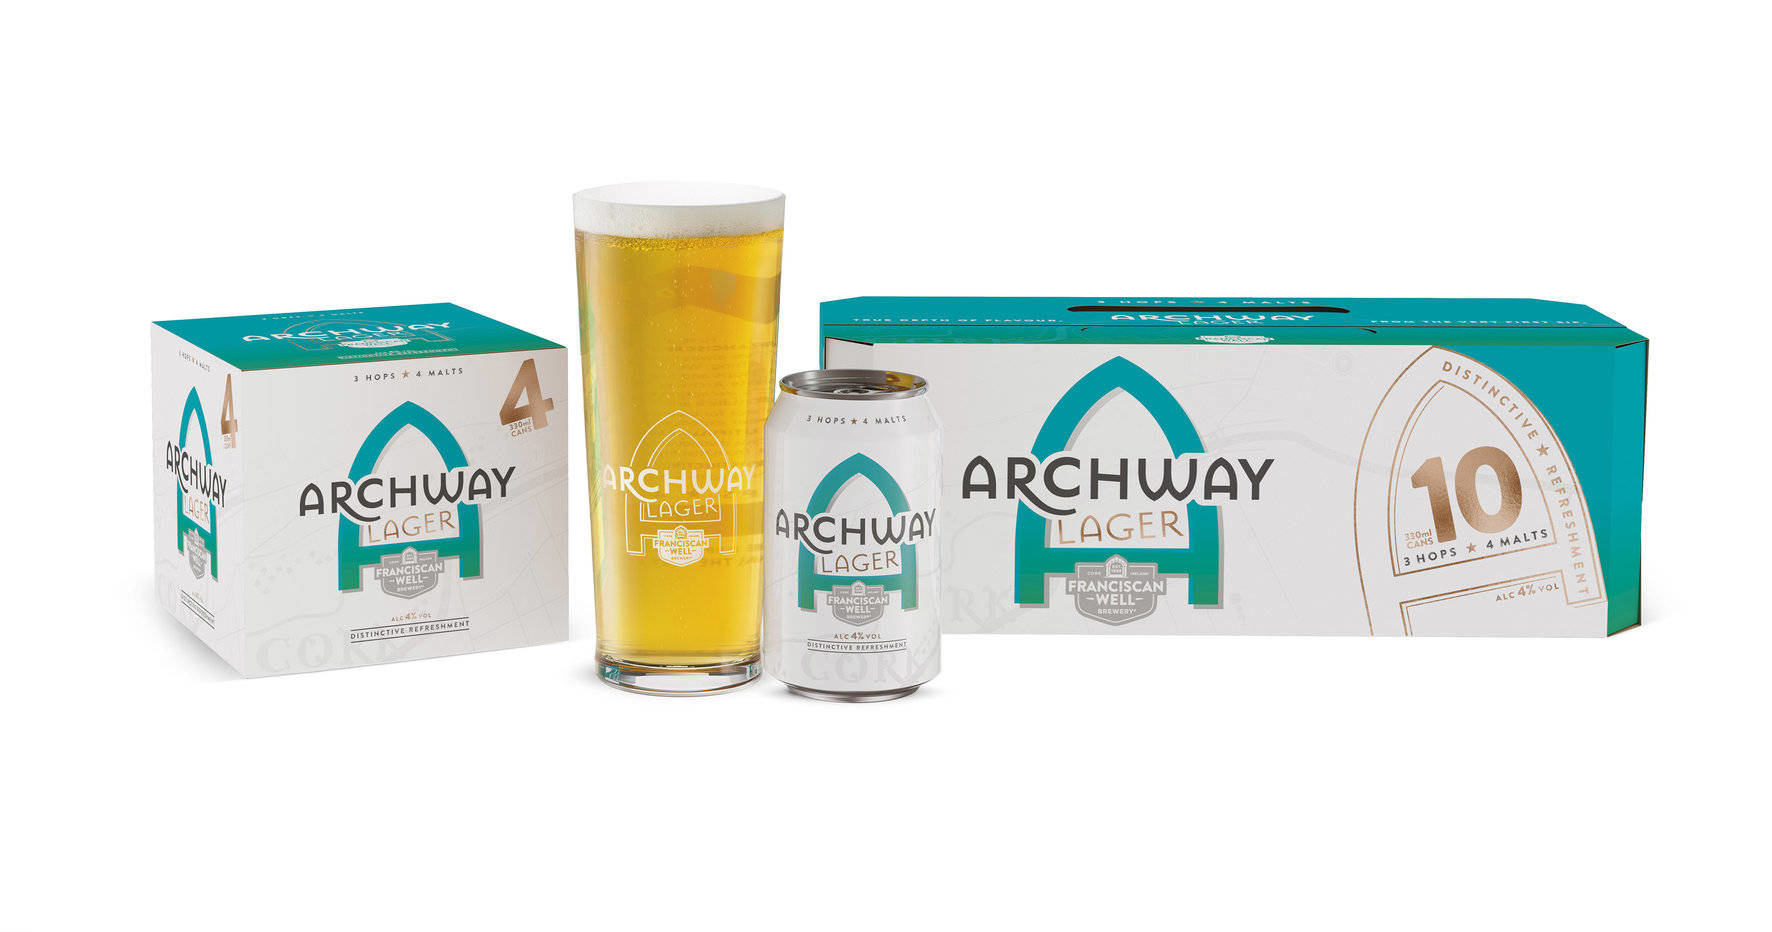 Archway is now available on draught in Dublin and Cork and will be rolled out nationally over the coming weeks. 330ml cans of Archway are being launched in supermarkets and off-licences throughout the country.